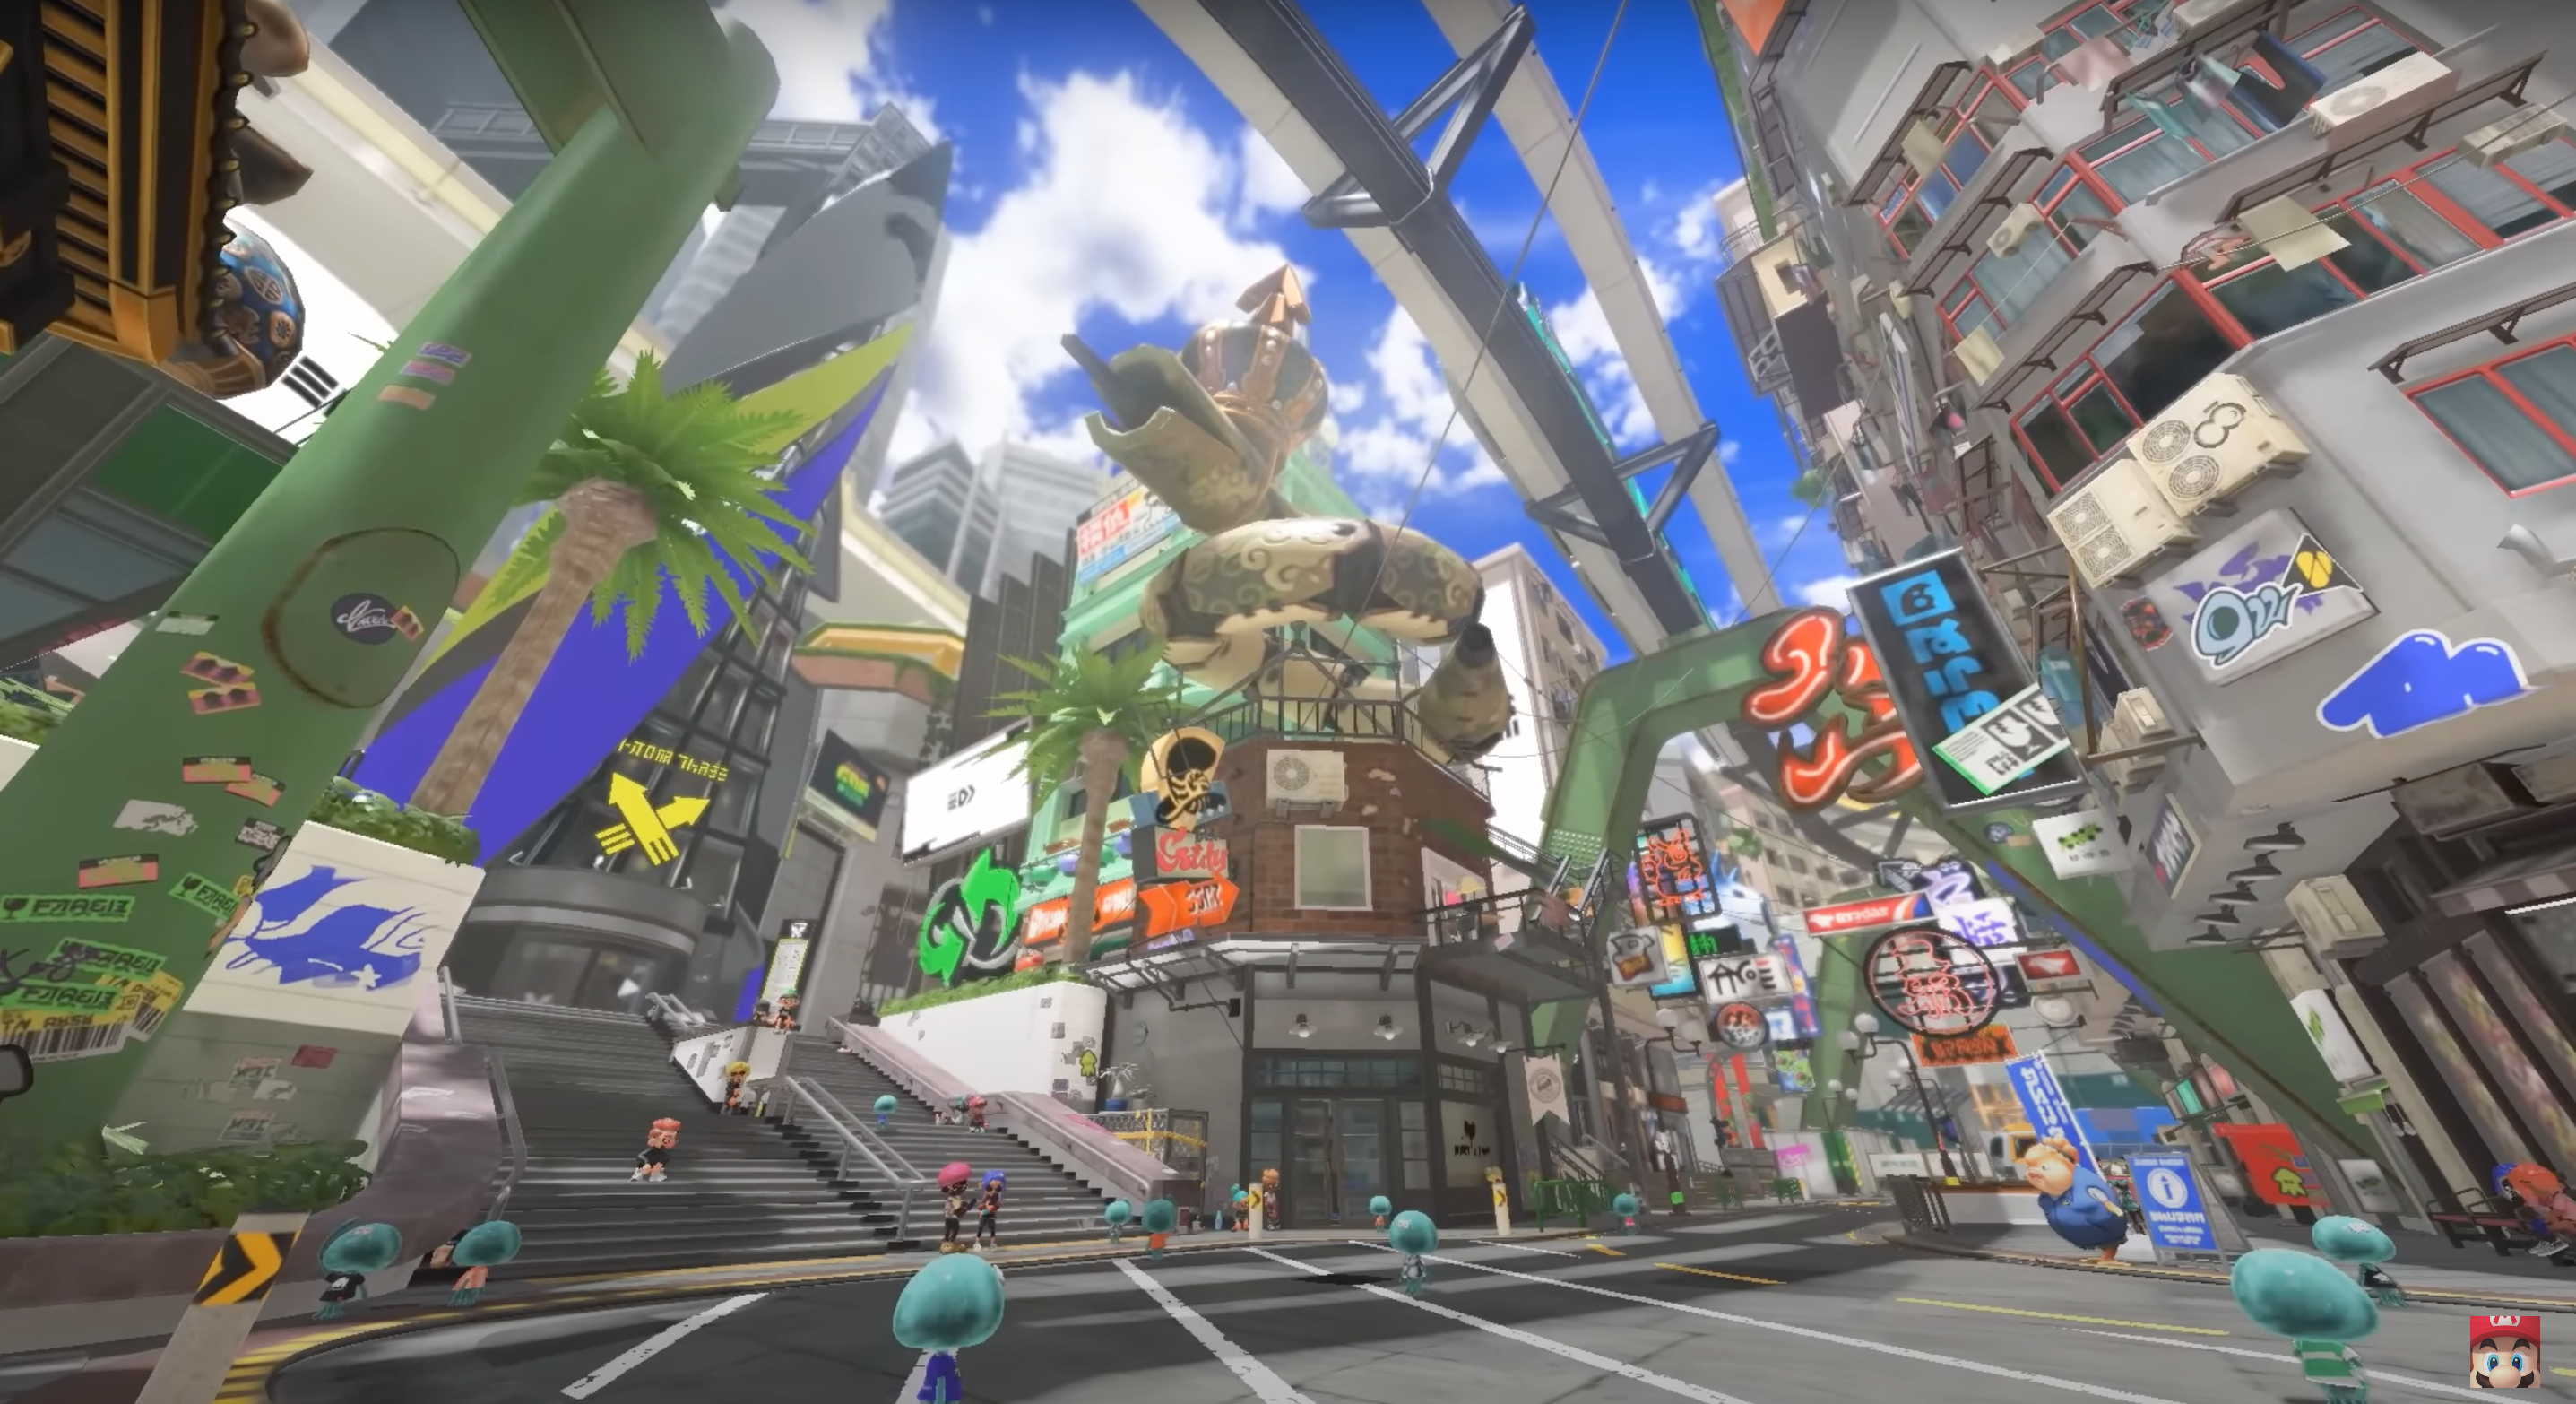 Here’s what you need to know about Splatoon 3